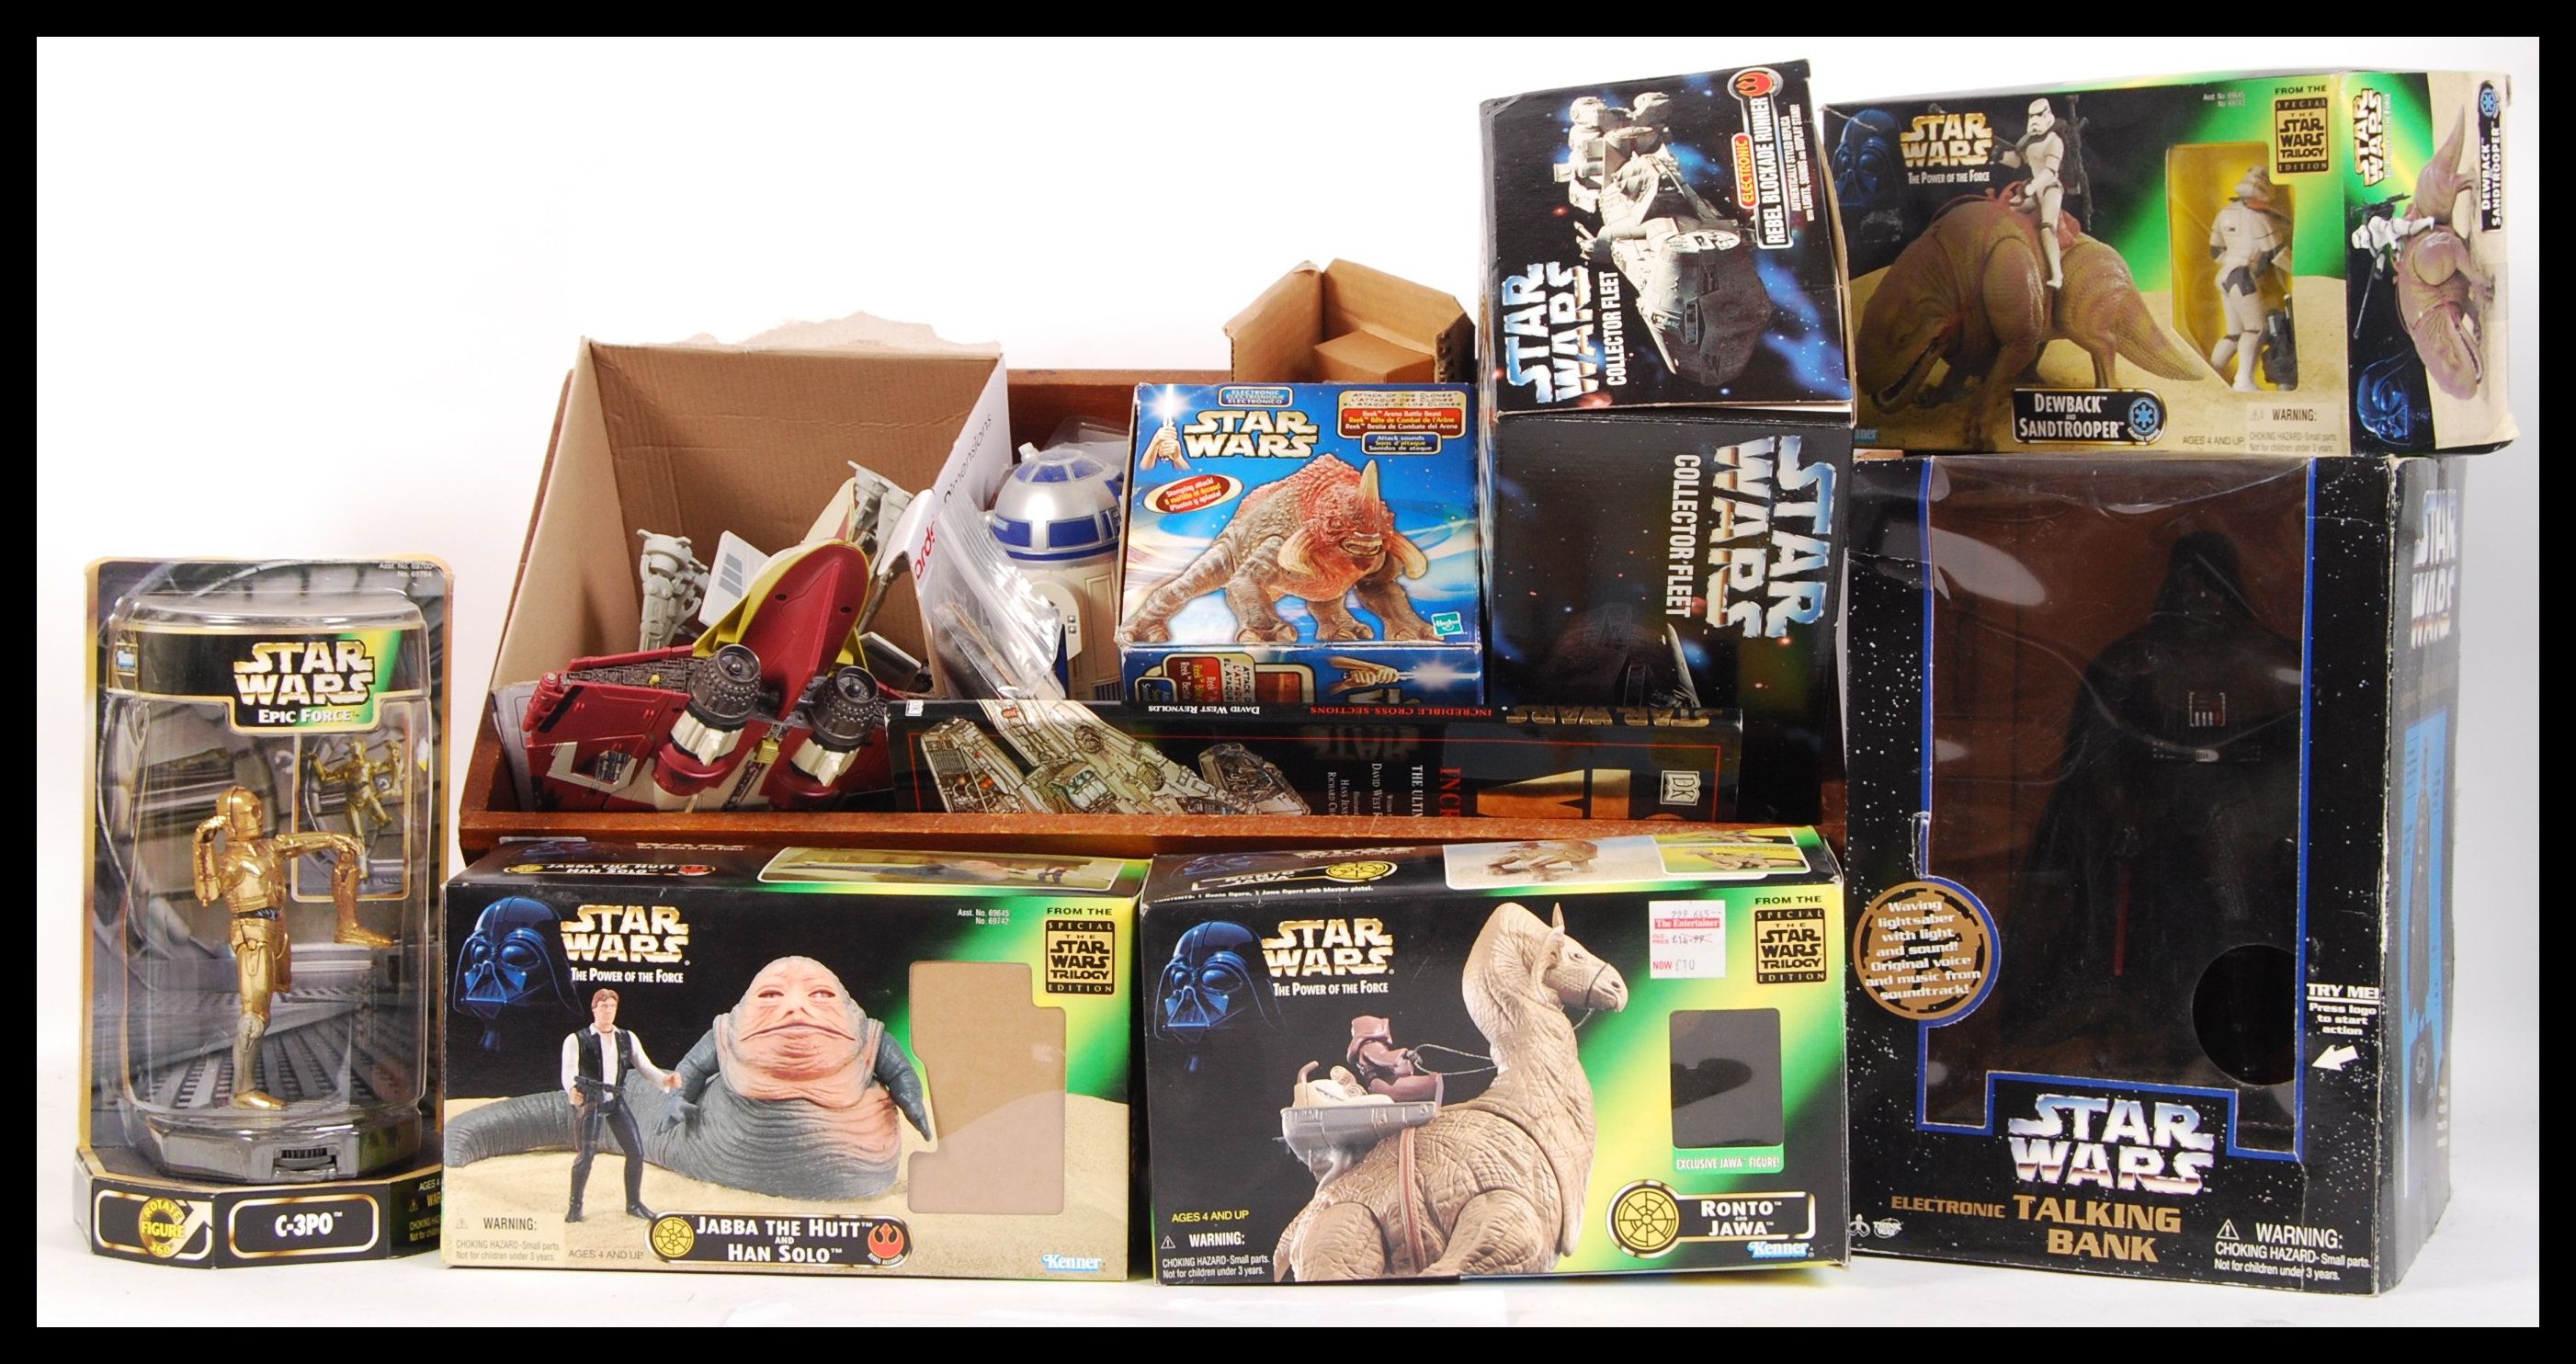 STAR WARS RELATED TOYS AND MERCHANDISE